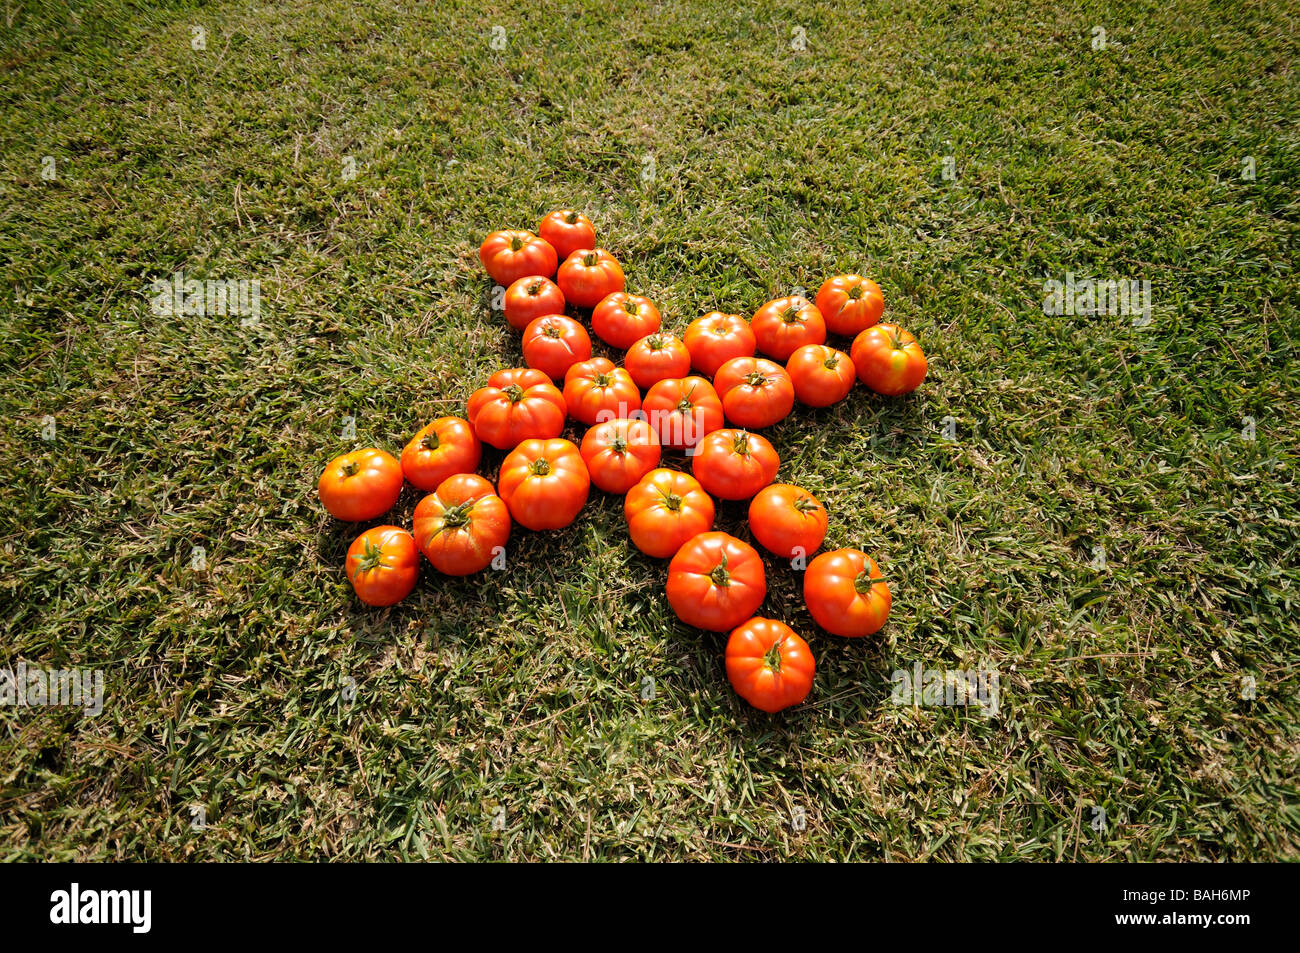 Group of tomatoes representing a cross over the grass. Stock Photo